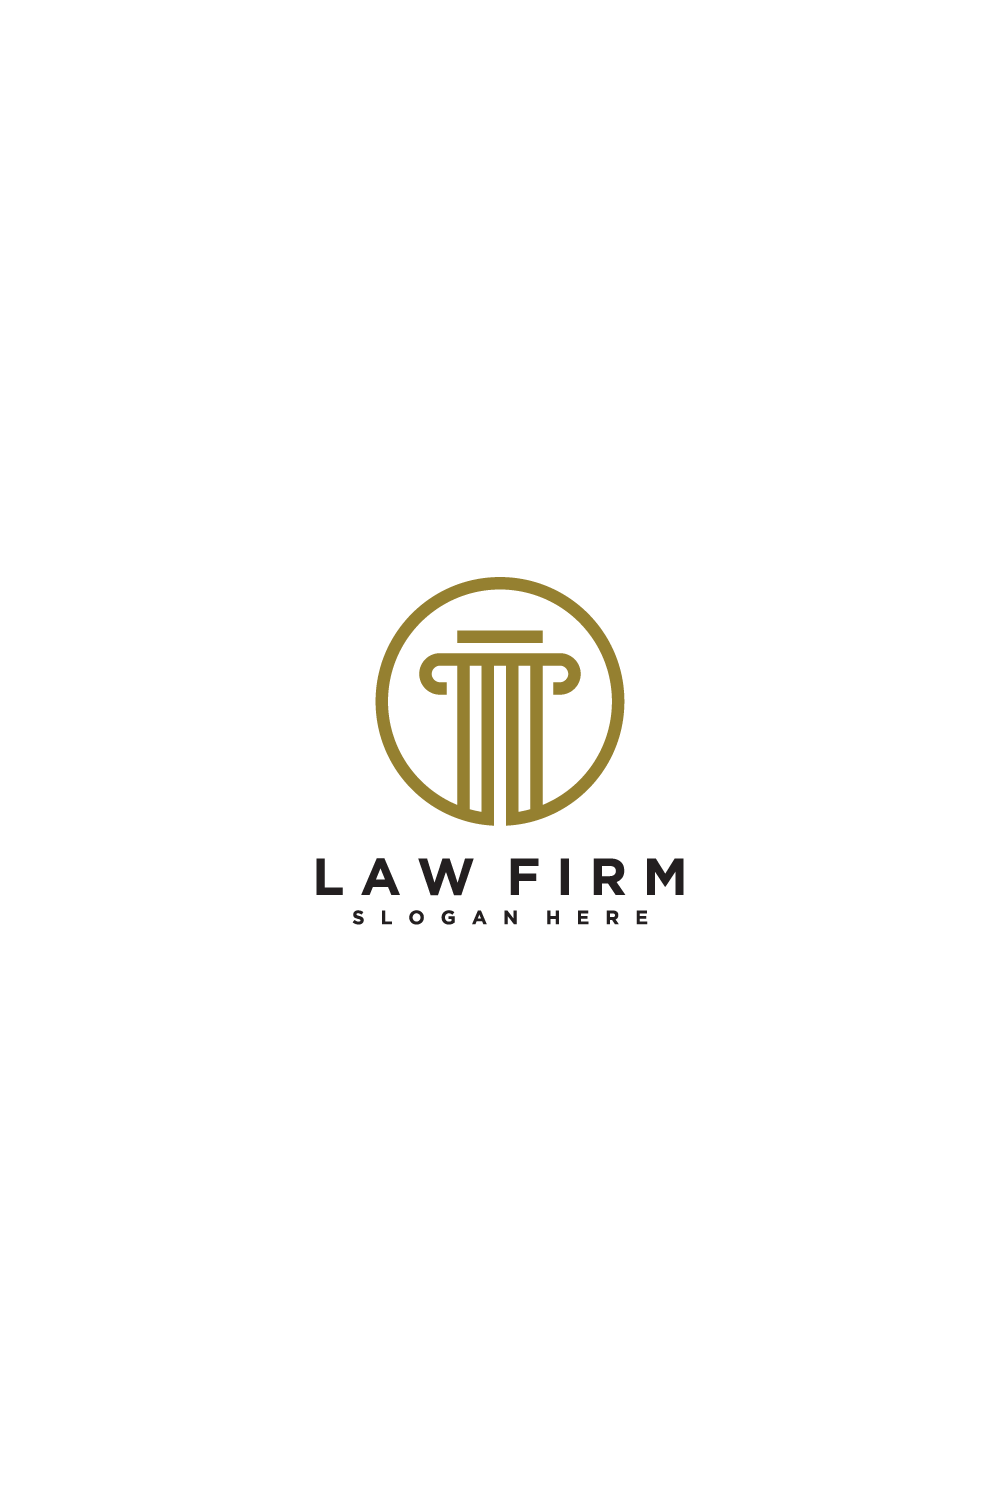 law firm logo pinterest preview image.